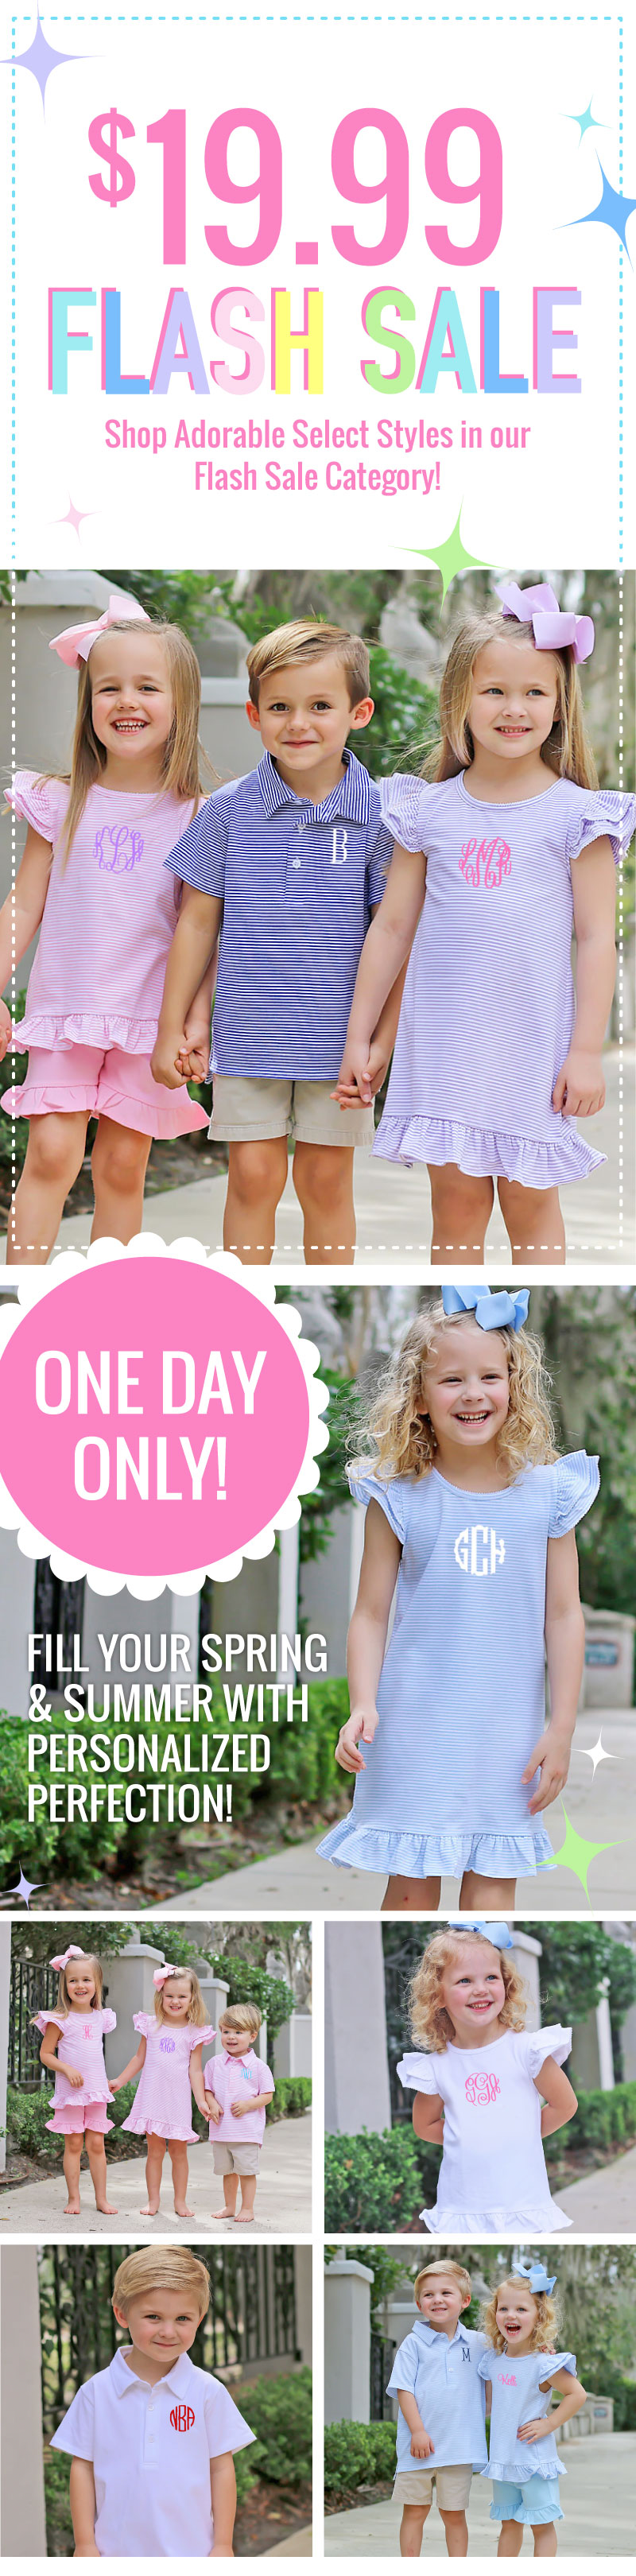 $19.99 Flash Sale! Shop adorable select styles in our flash sale category! One day only!